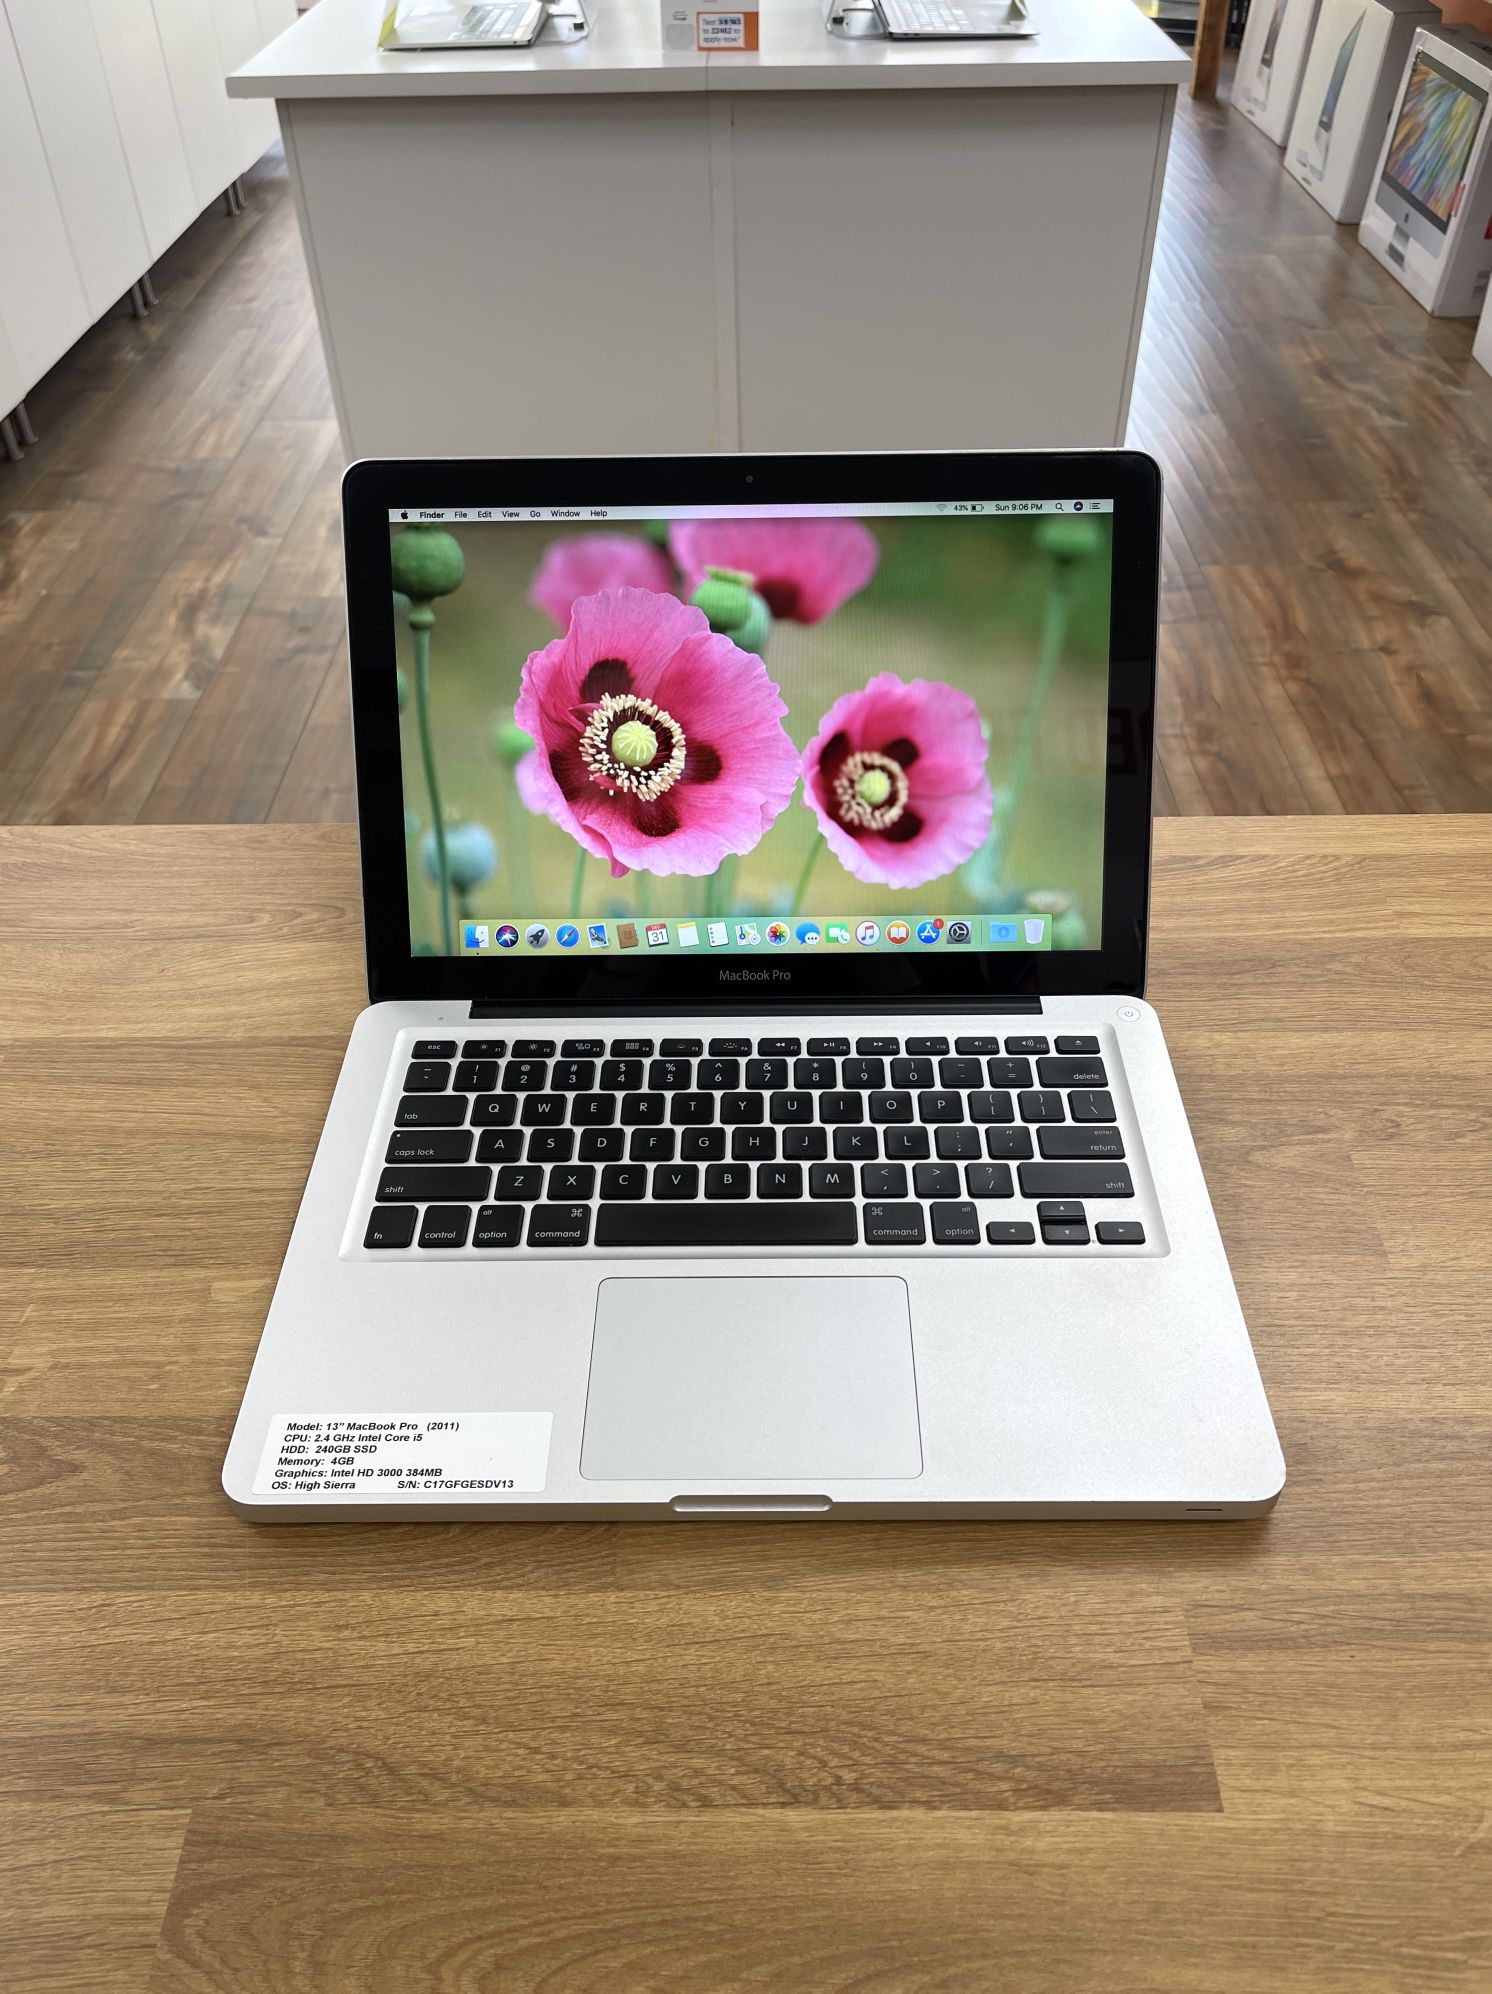 13" MacBook ** 2.4Ghz Intel Core i5 ** 240GB SSD ** 4GB RAM ** Excellent Condition for Sale in Los Angeles, CA - OfferUp